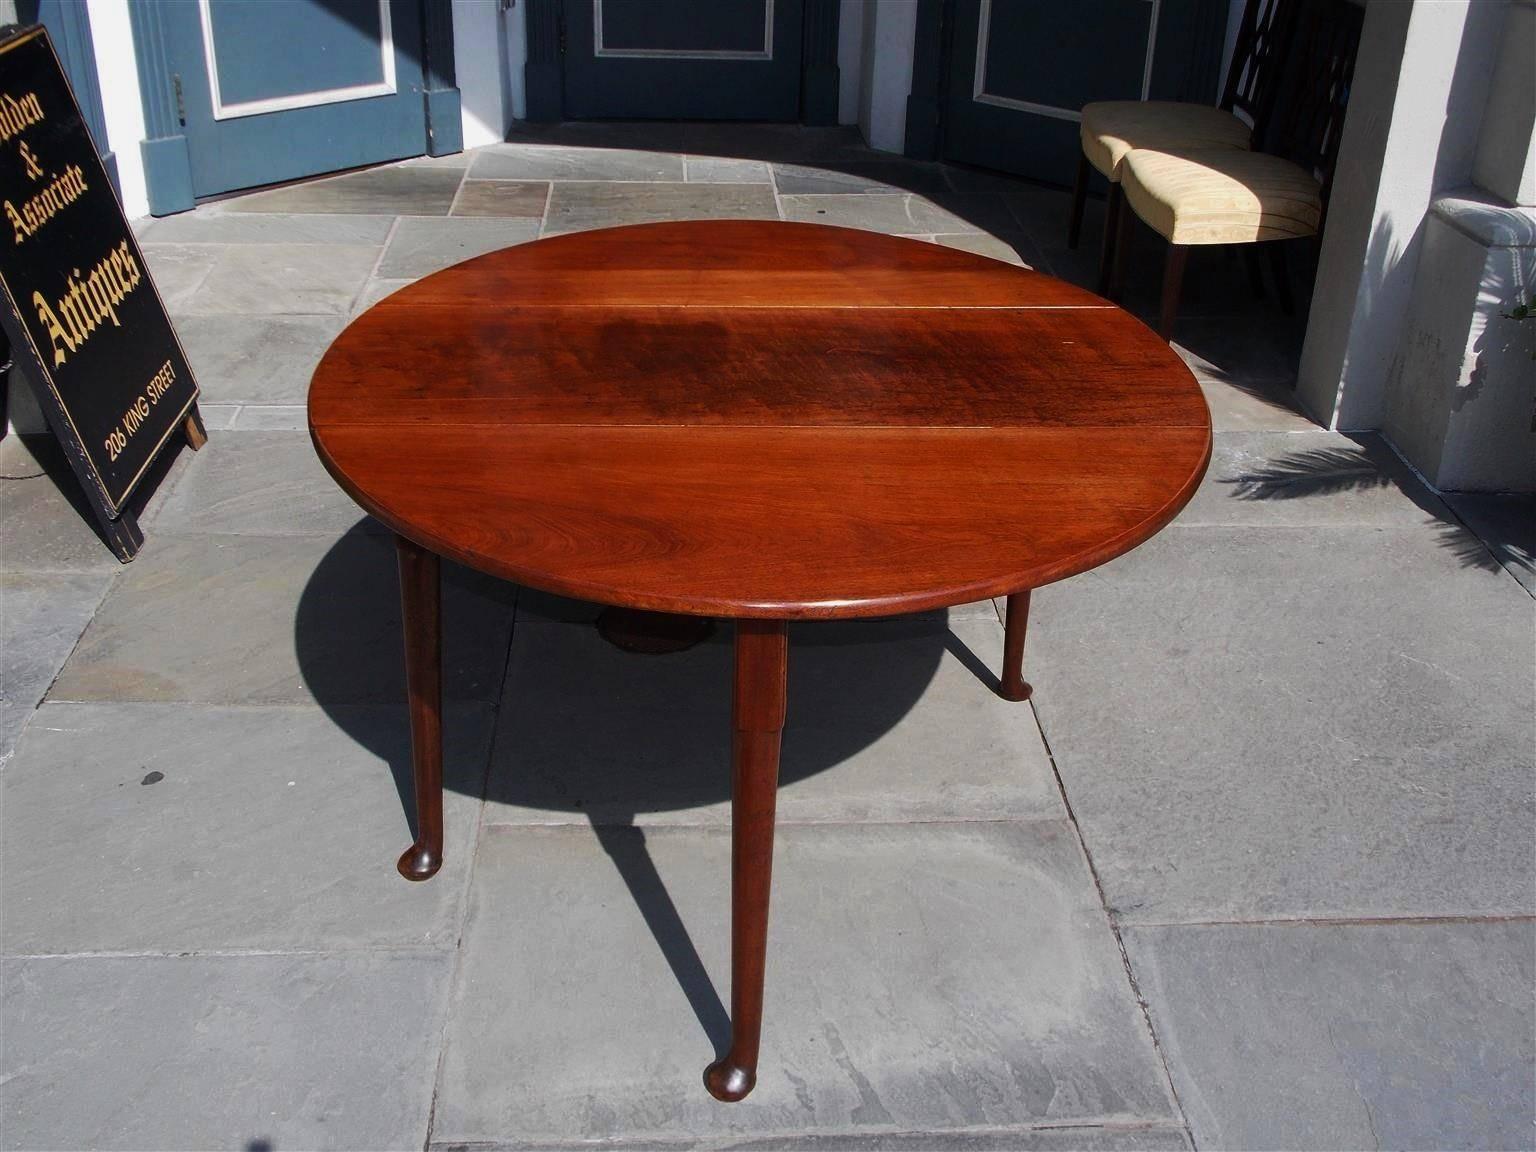 Hand-Carved English Queen Anne Walnut Oval Drop-Leaf Table with Pad Feet, Circa 1740 For Sale